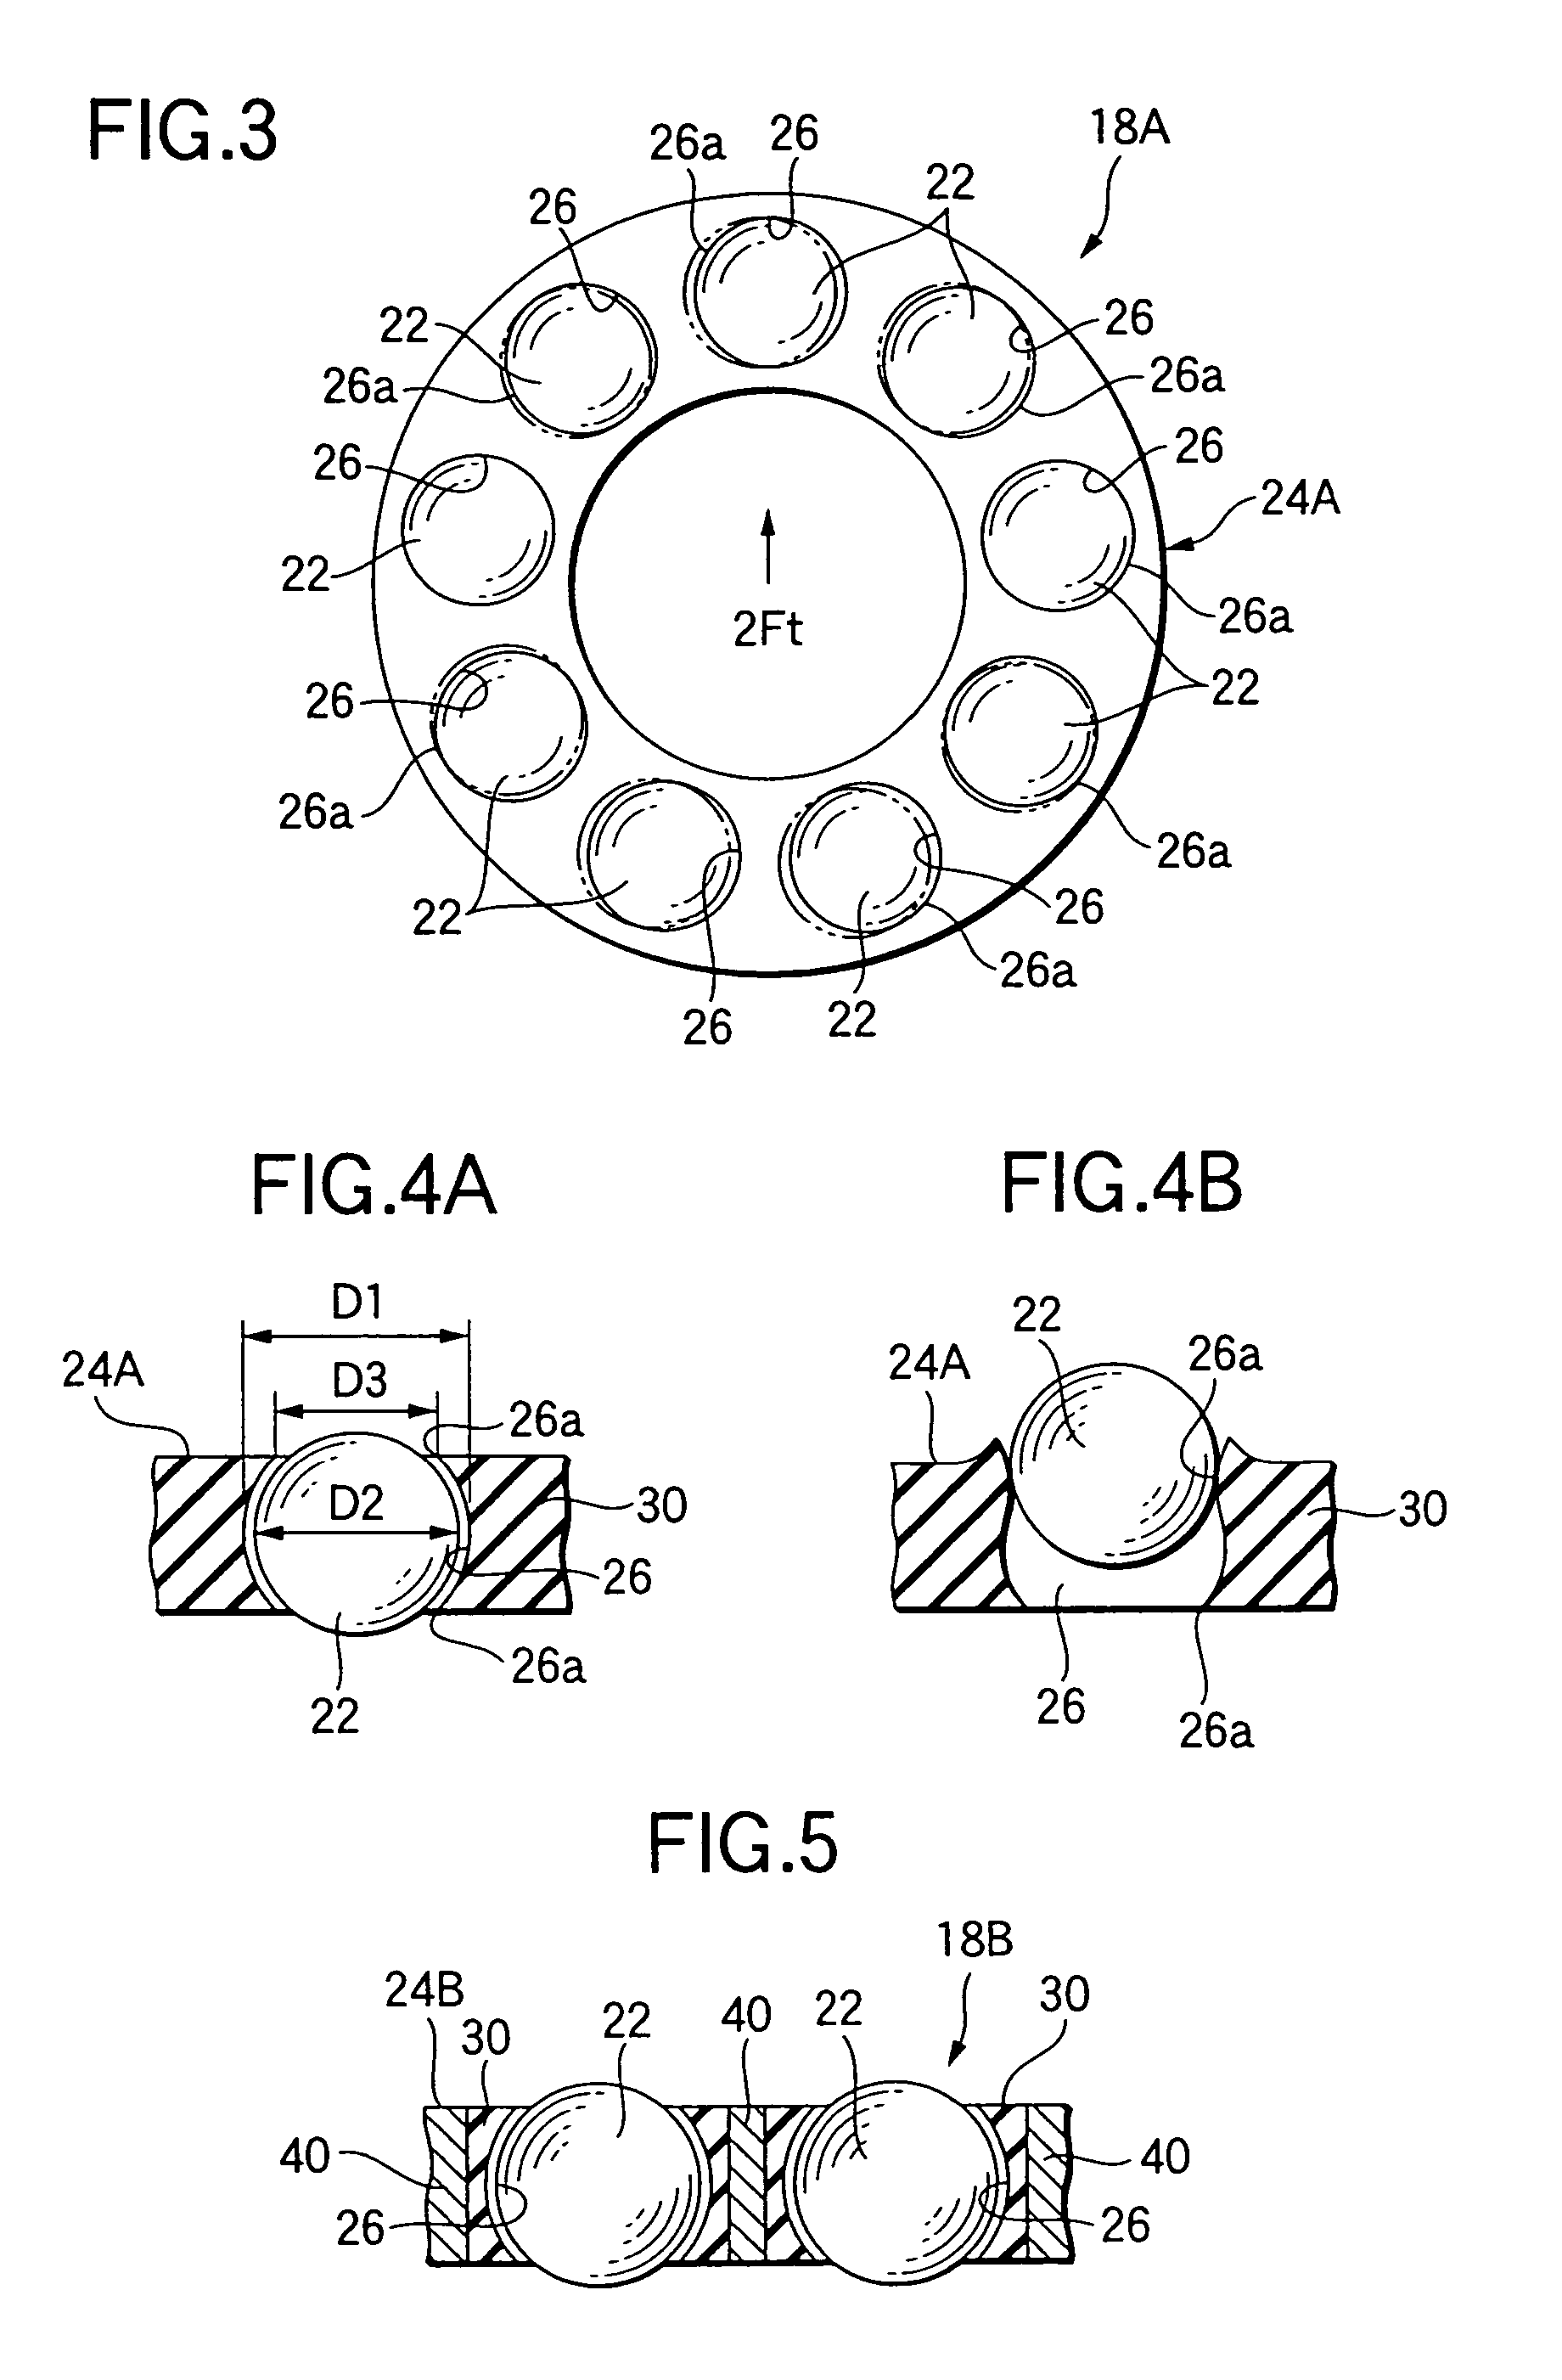 Power roller bearing for toroidal-type continuously variable transmission